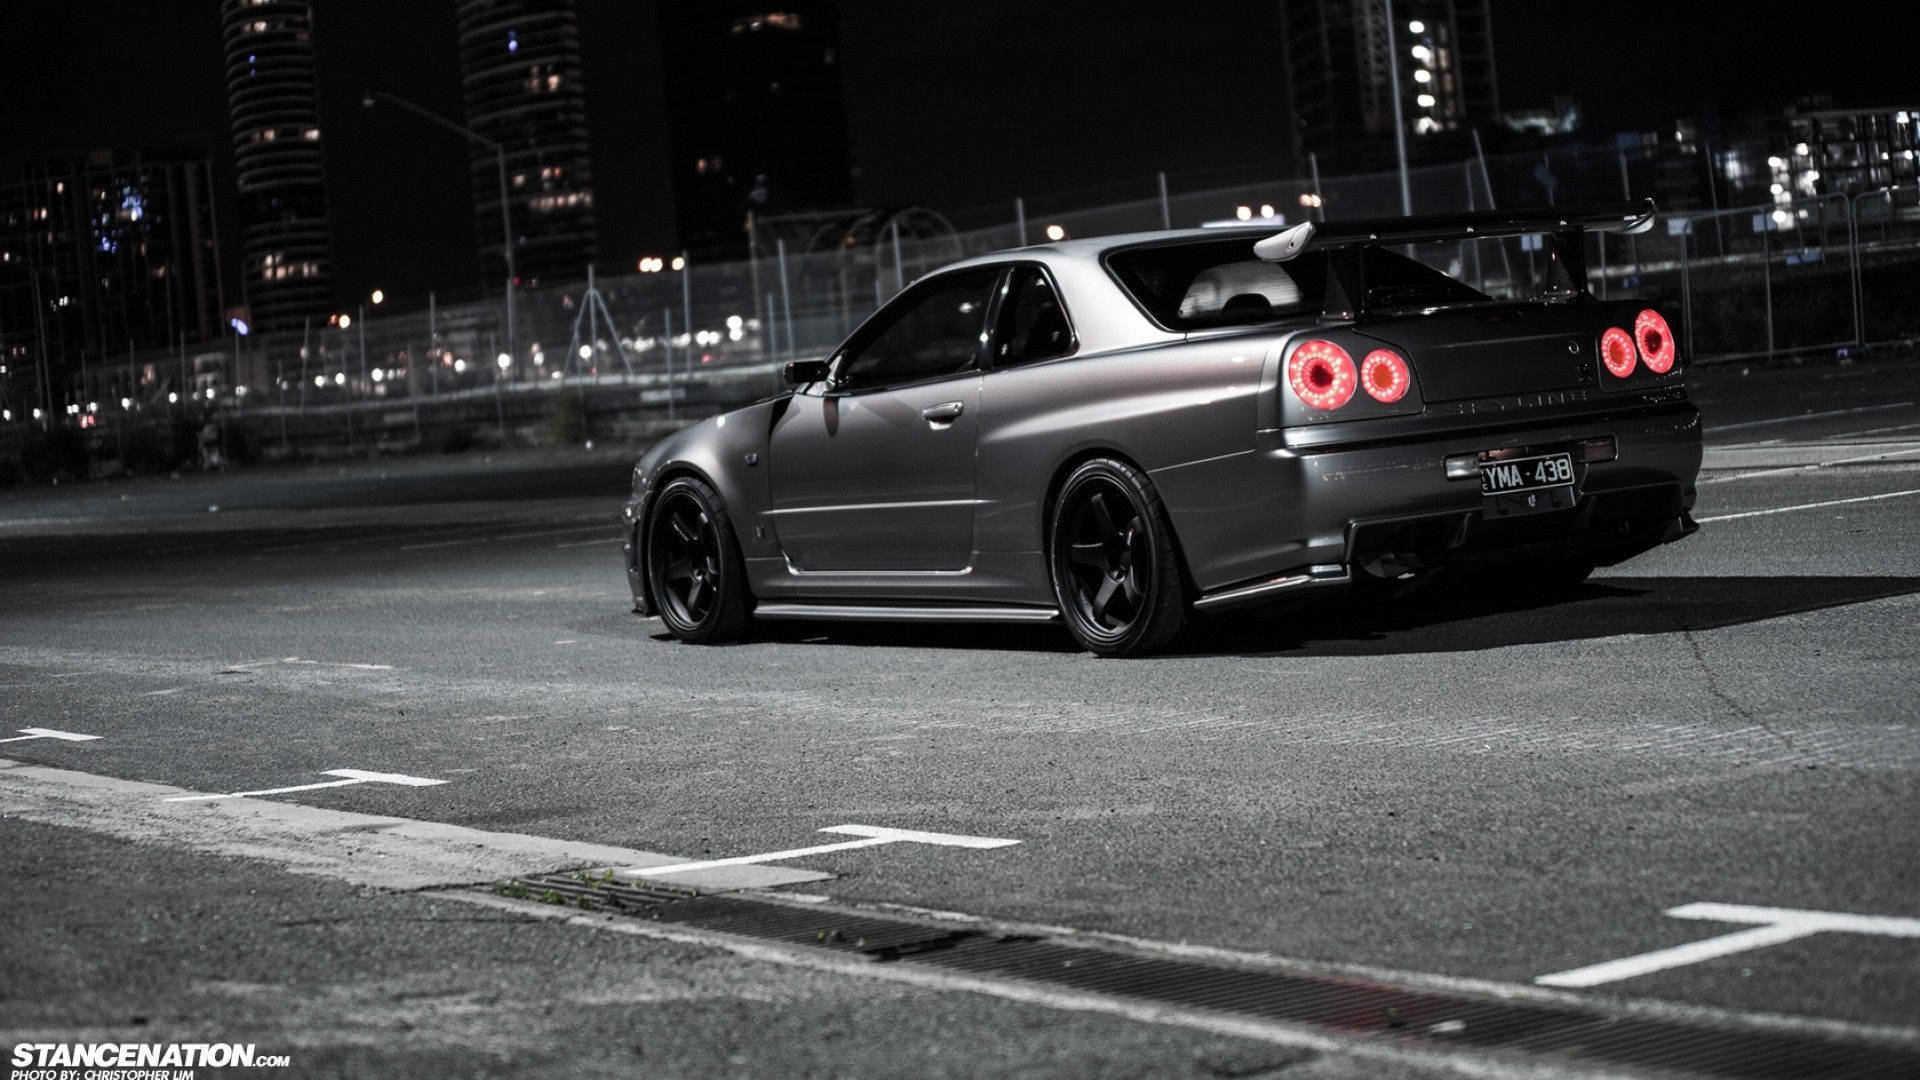 Blaze Through the City Streets with this Street Racing Inspired JDM Nissan R34 Wallpaper